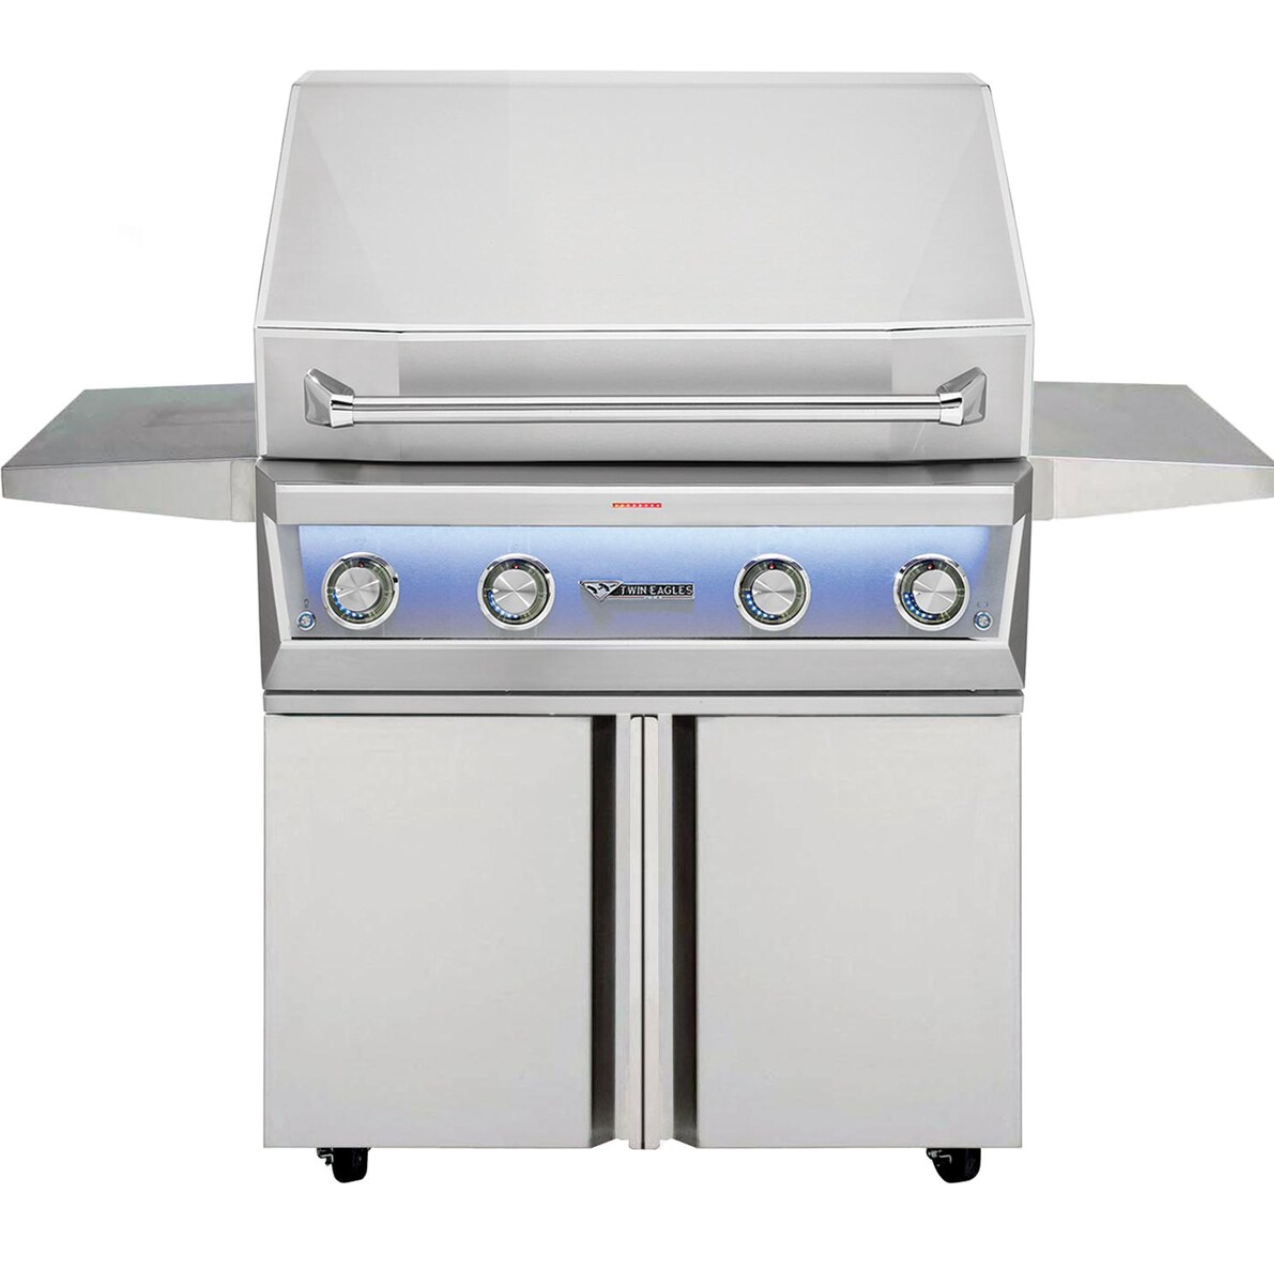 Portable Gas BBQ - Stainless Steel Grill - Southern X Limits